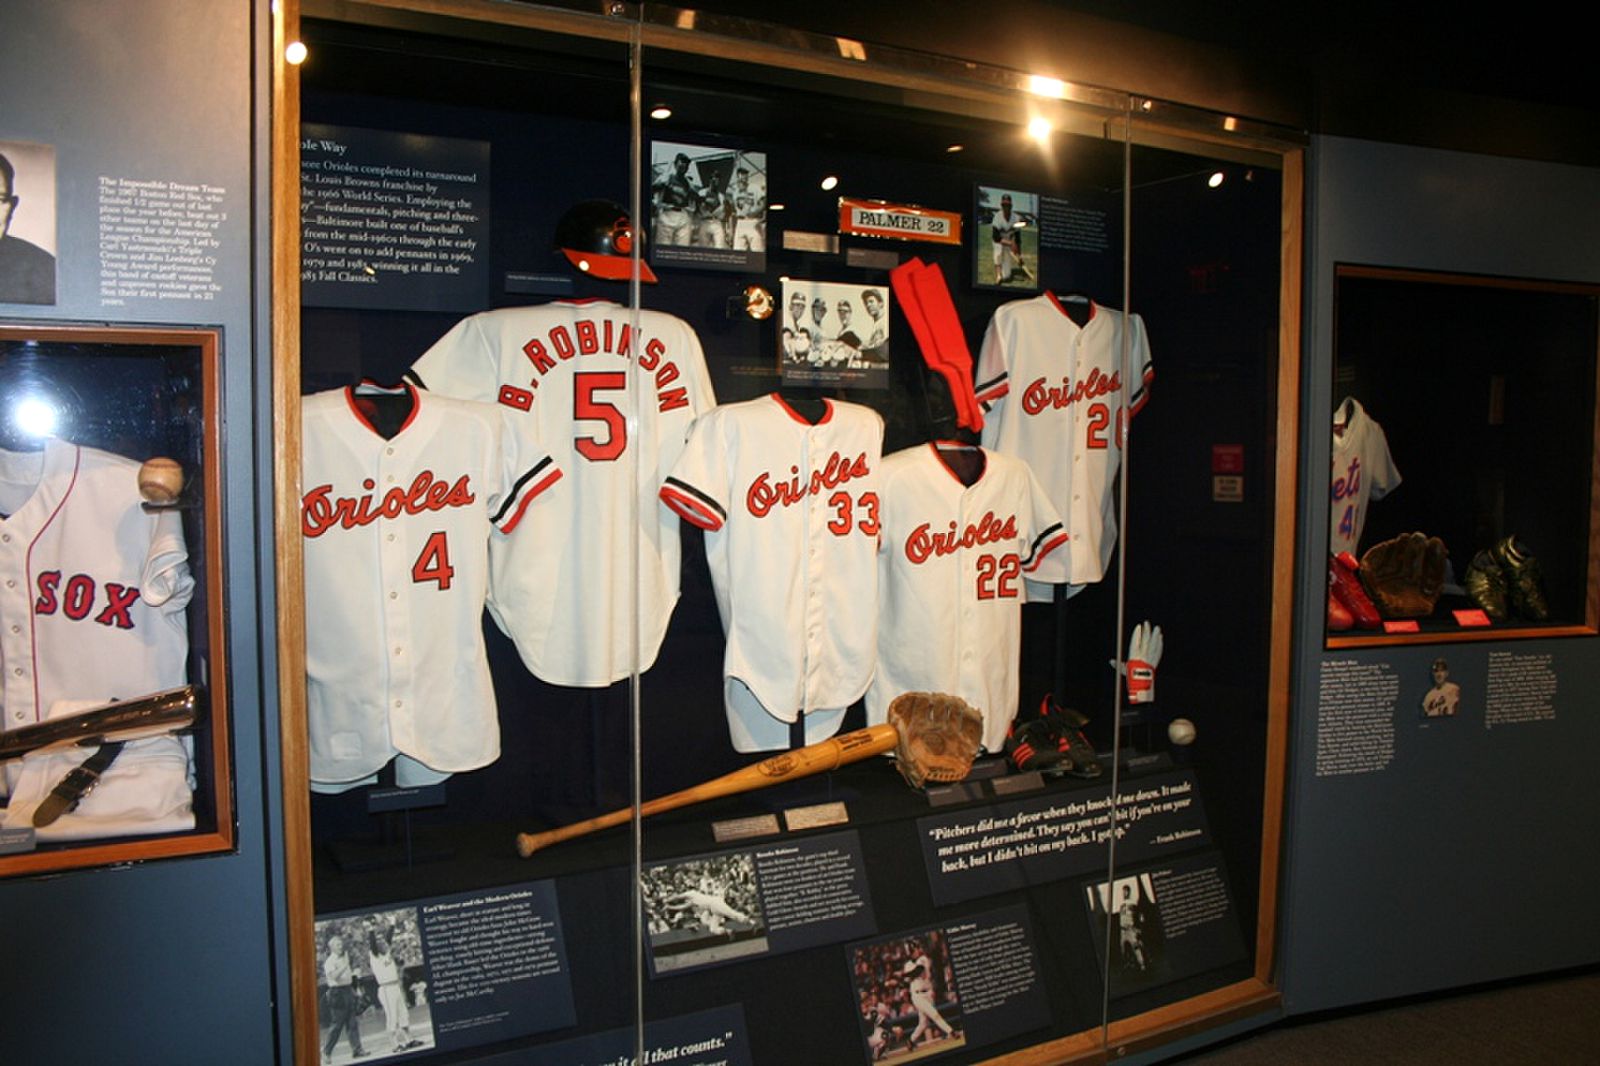 There were several display cases throughout the museum.  This one featured the Baltimore Orioles.